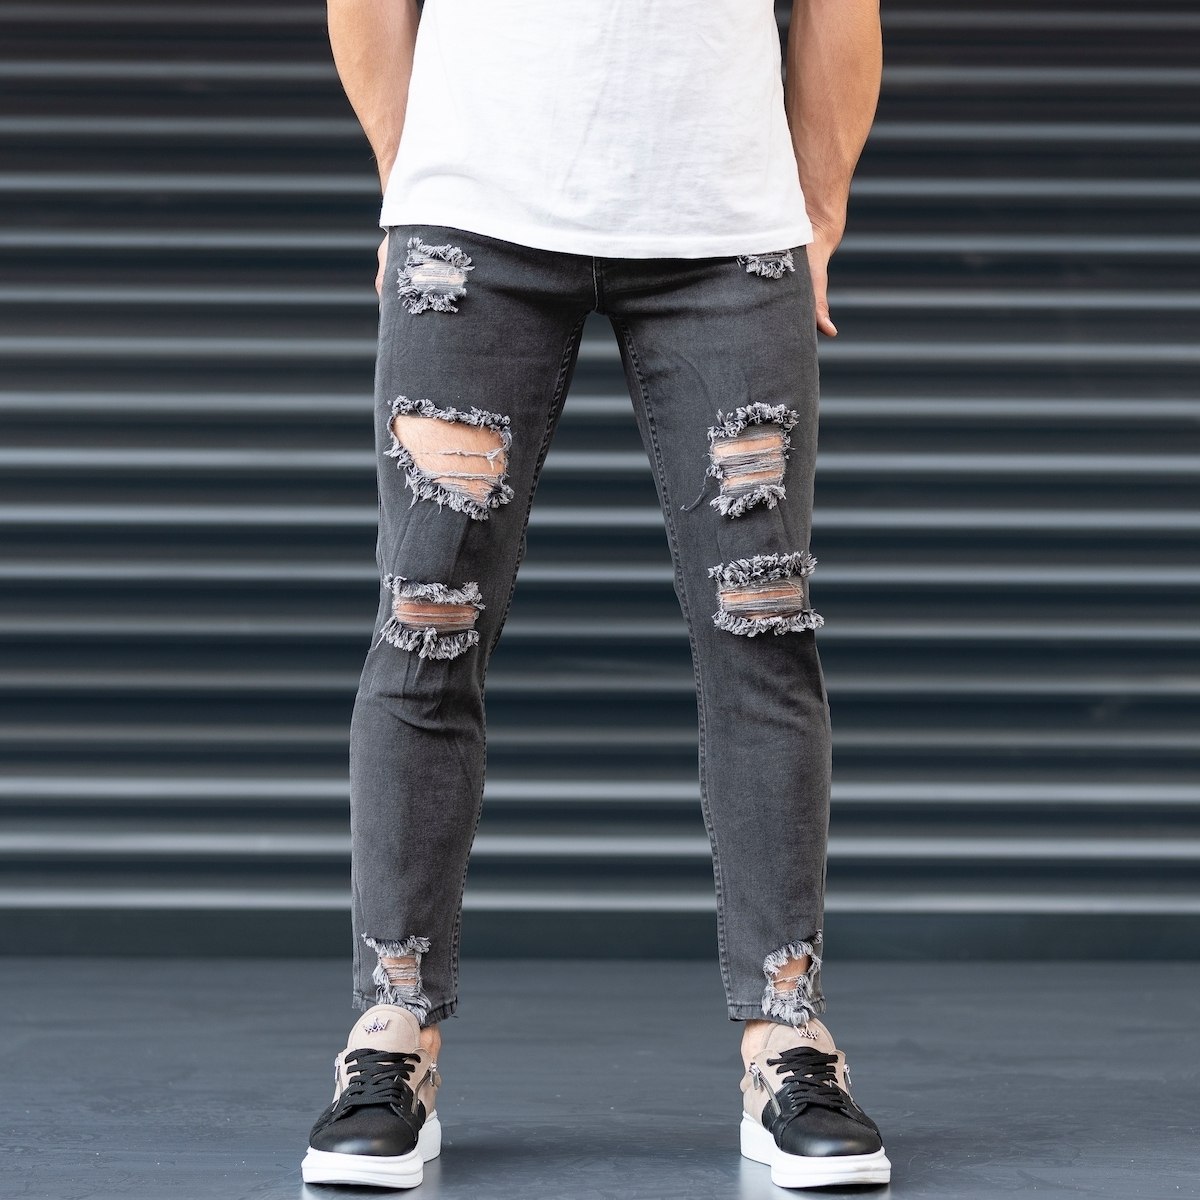 00 ripped jeans